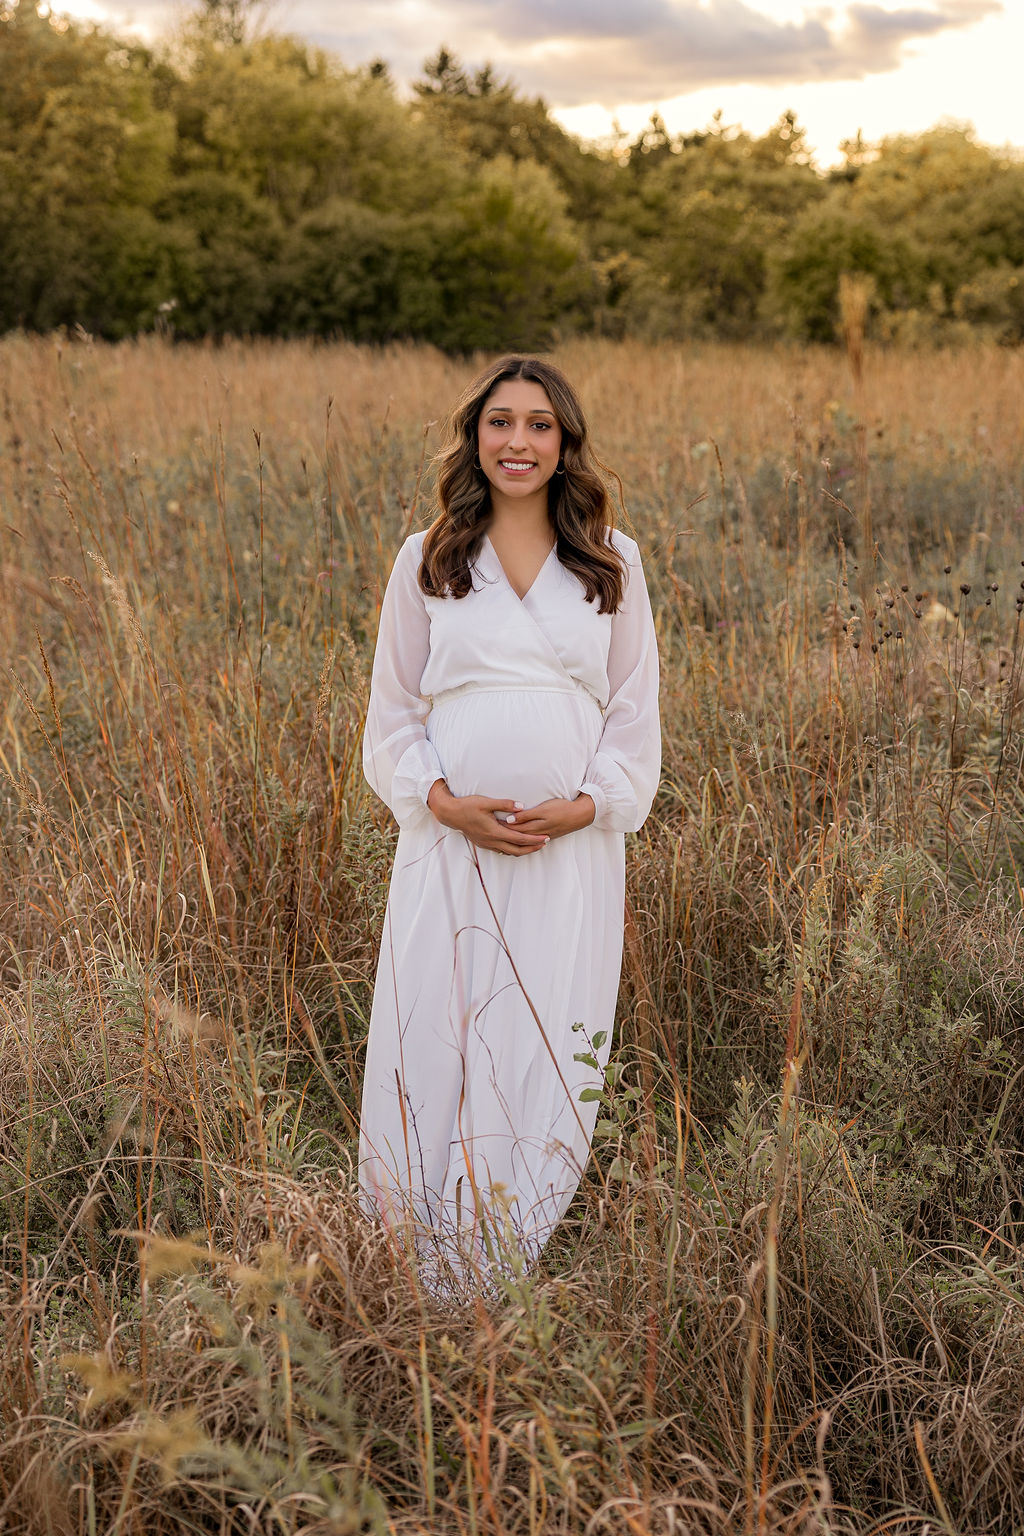 A mother to be smiles wile holding her bump and standing in a field at sunset in a white maternity gown